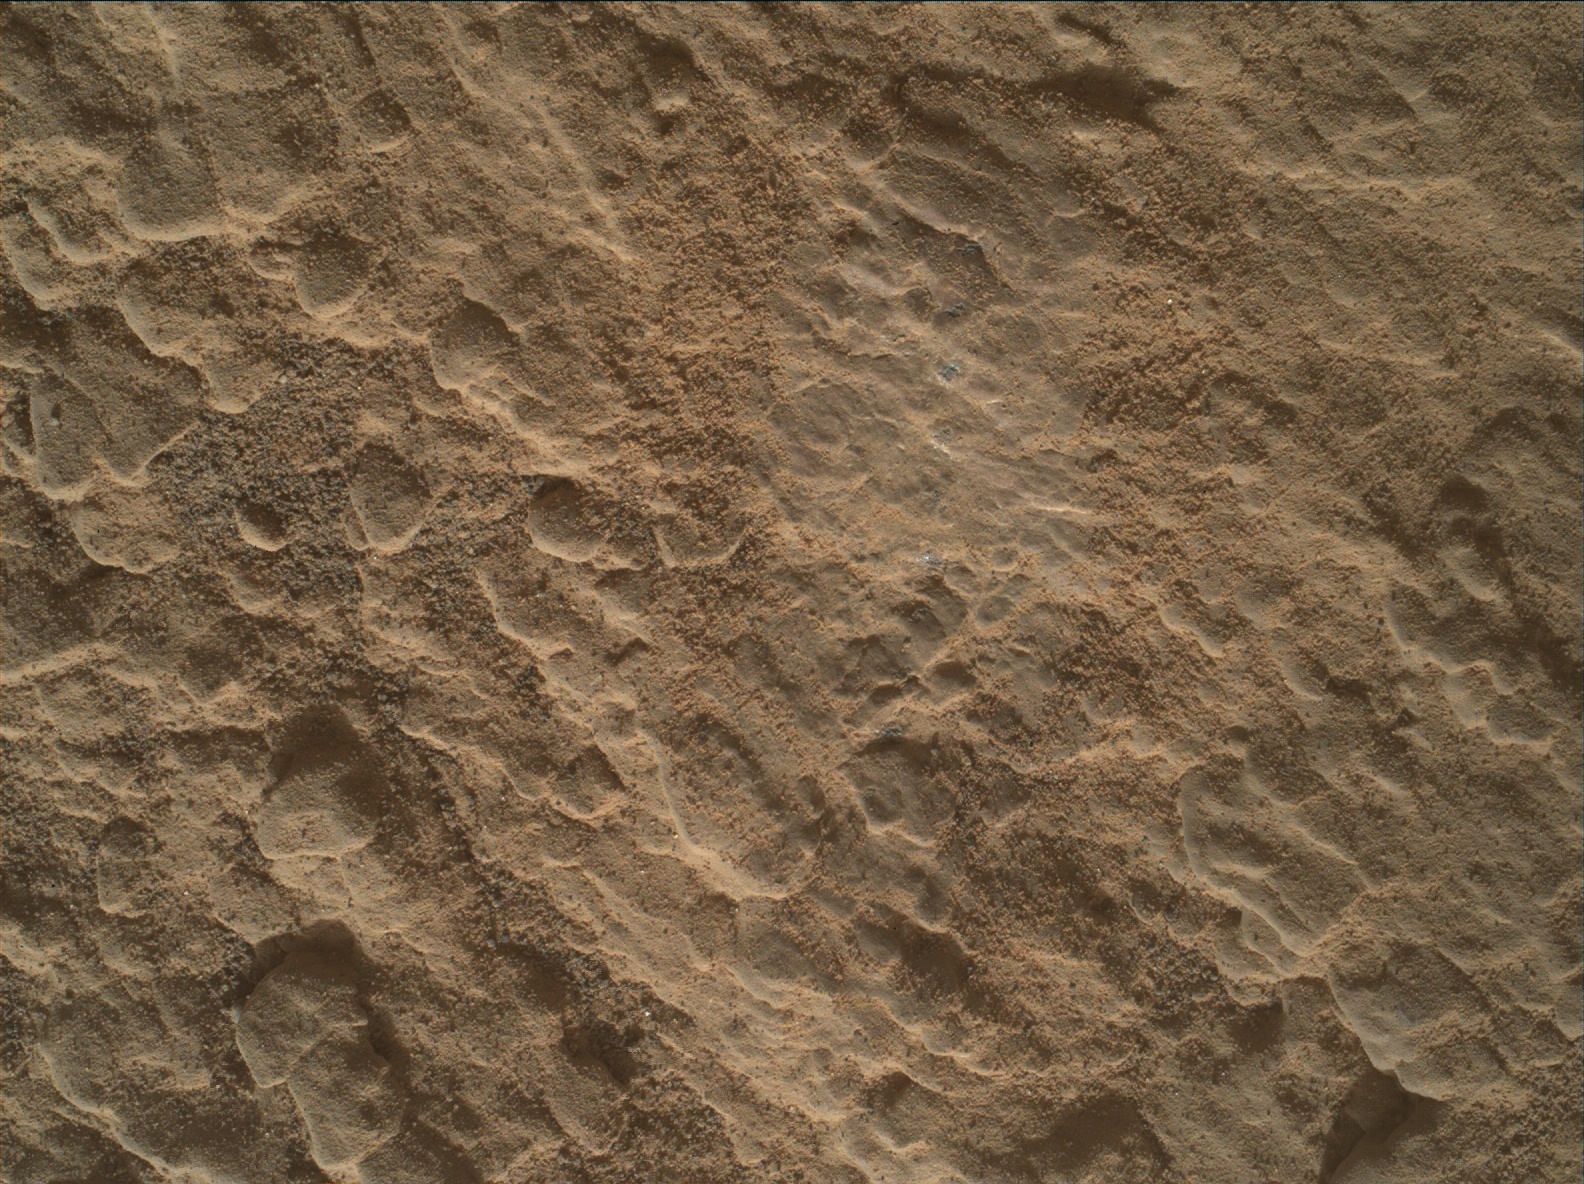 Nasa's Mars rover Curiosity acquired this image using its Mars Hand Lens Imager (MAHLI) on Sol 2589